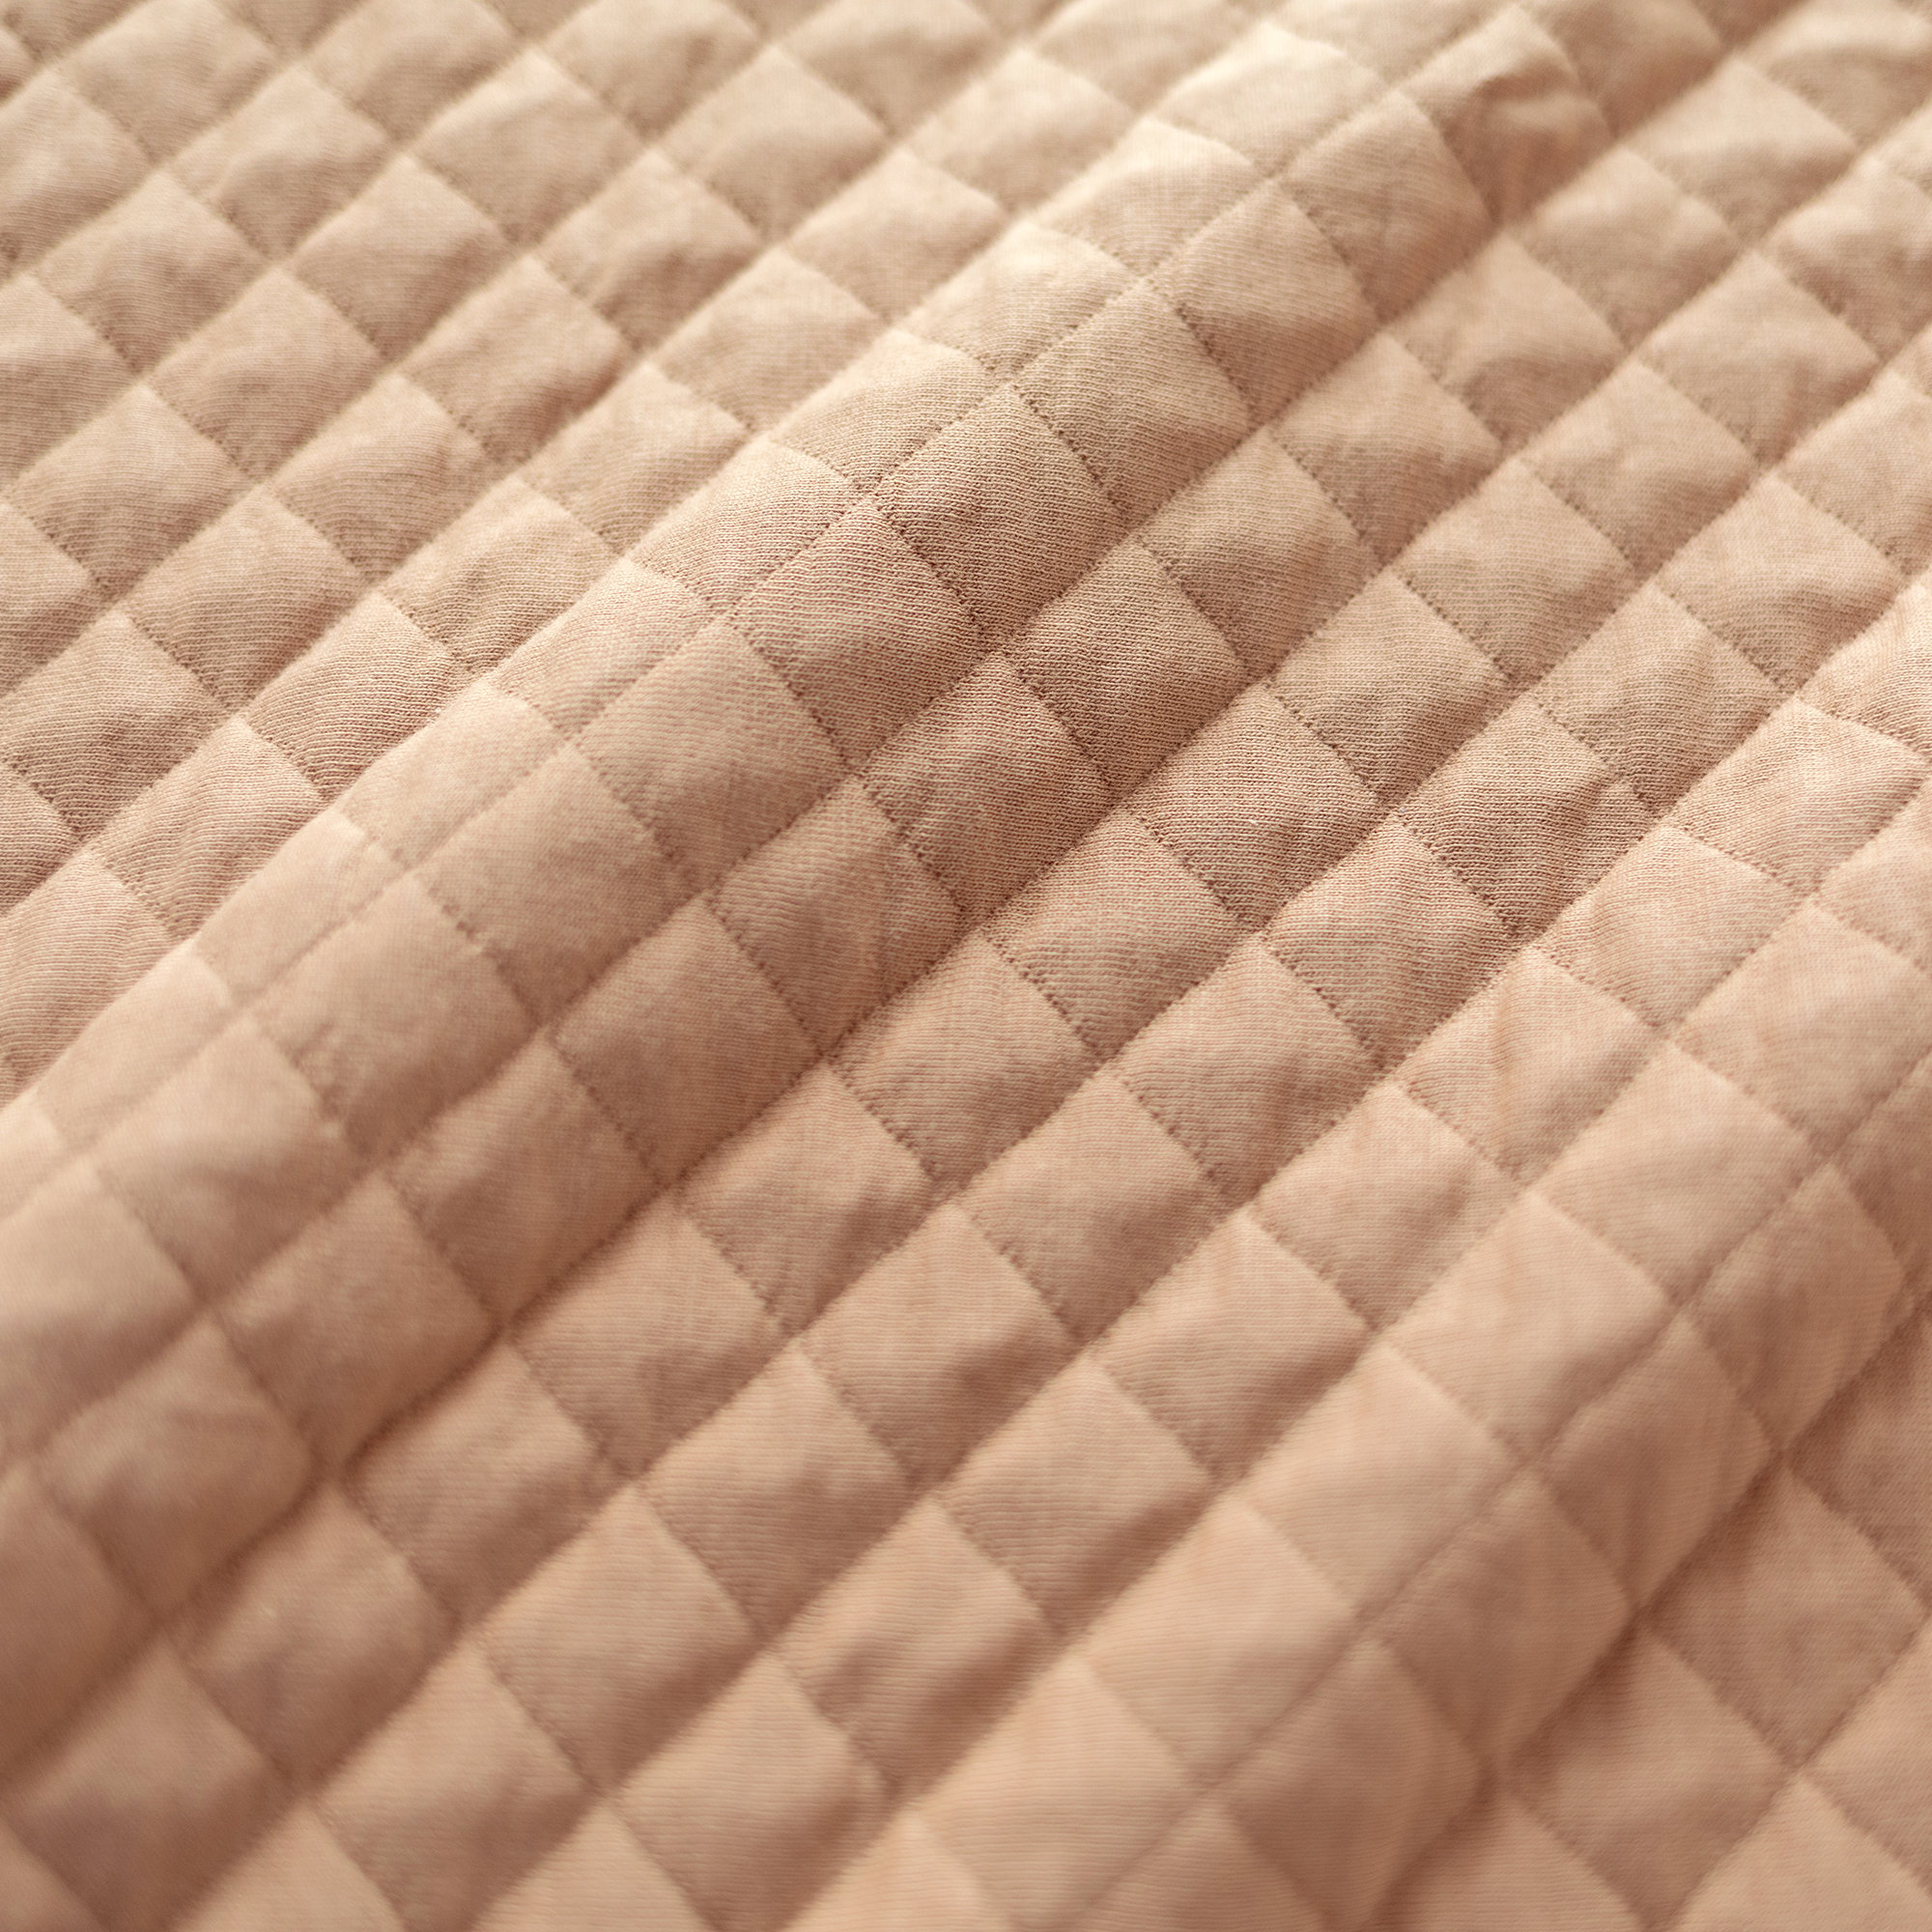 Blanket Pady quilted jersey 75x100cm QUILT Beige tog 1.5[WANDER]